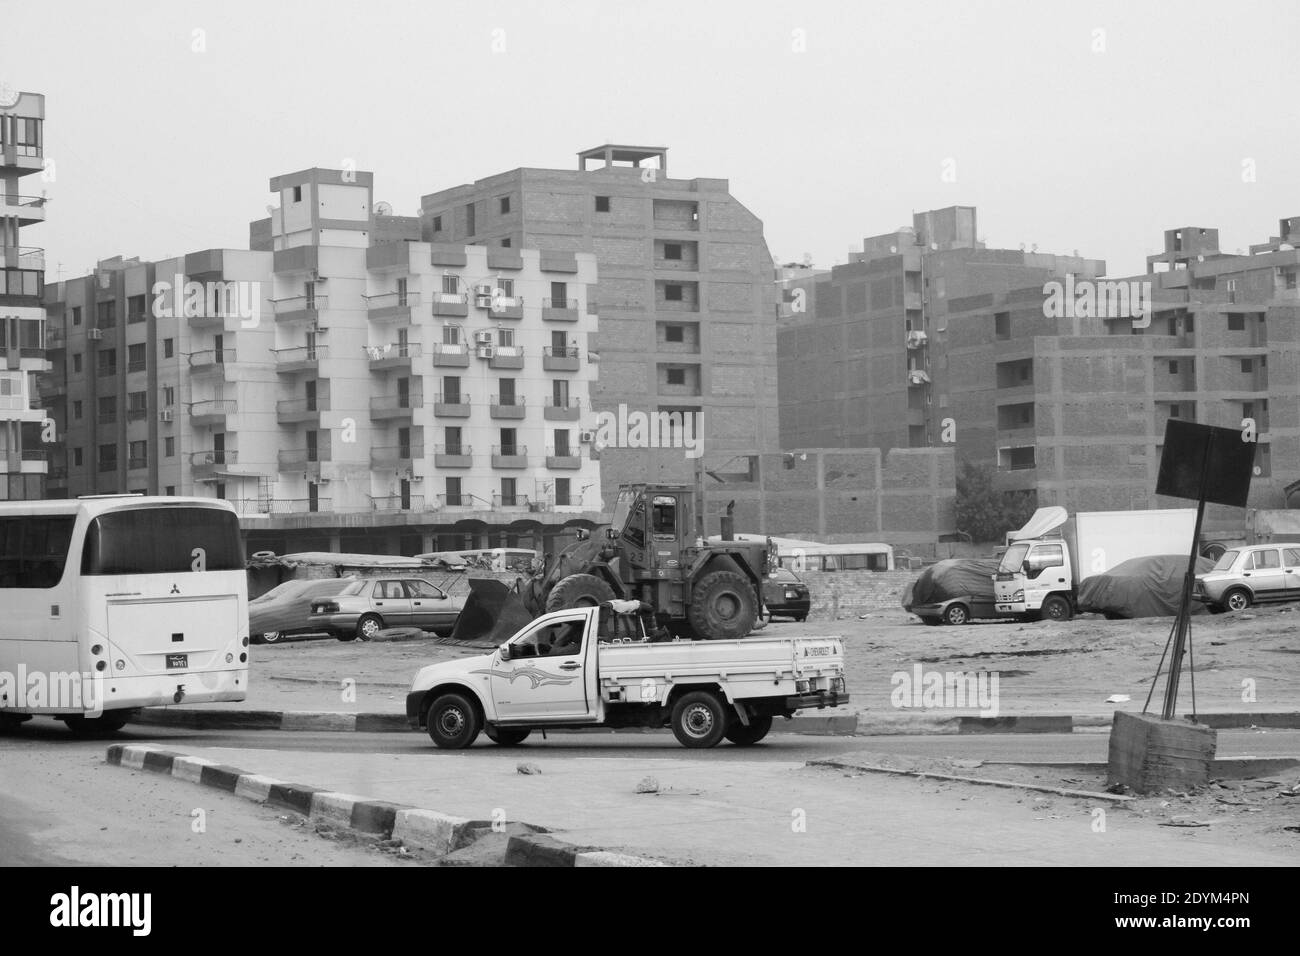 Cairo Egypt : buildings in Cairo with the road with cars, trucks and a bus Stock Photo